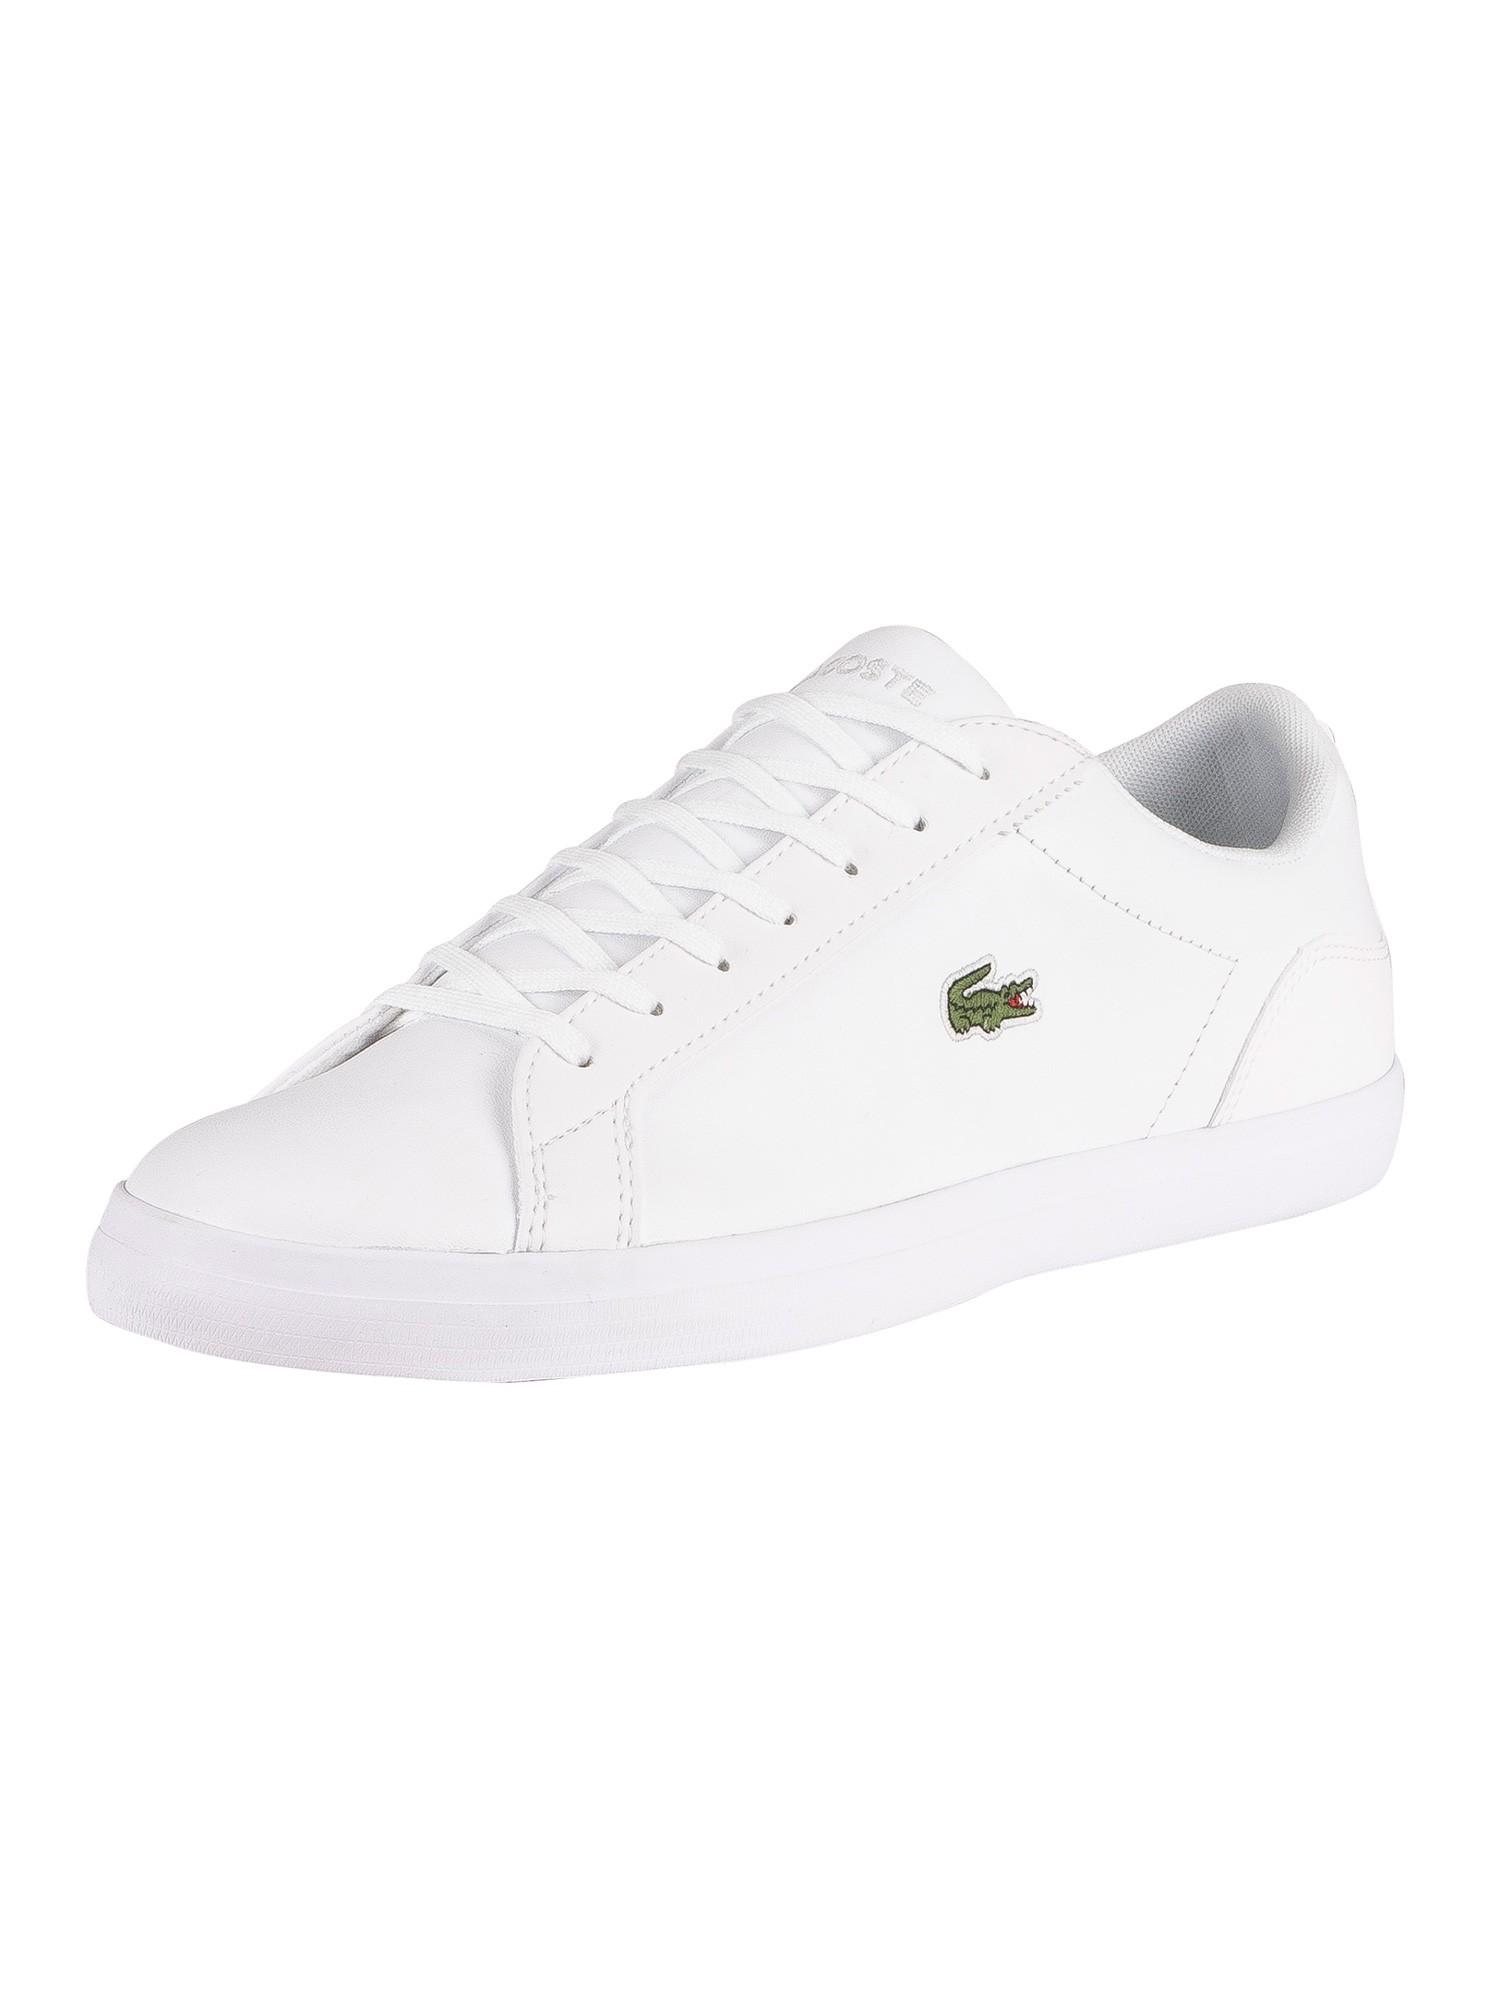 Lacoste Lerond Bl21 1 Cma Leather Trainers in White for Men | Lyst